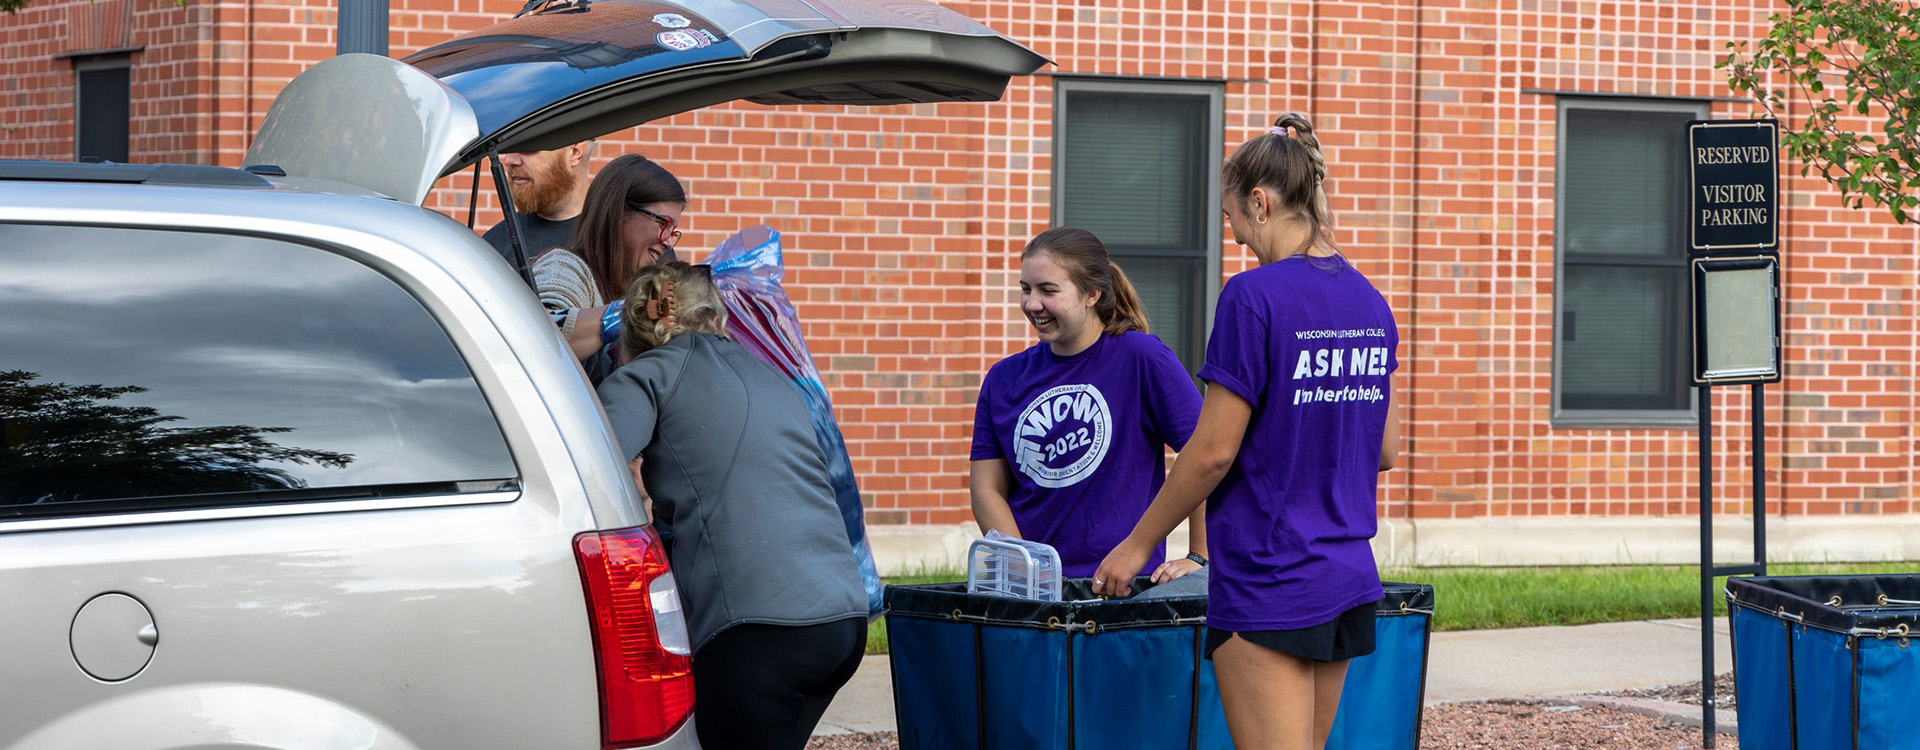 Student unloading vehicle during Warrior Orientation and Welcome Weekend